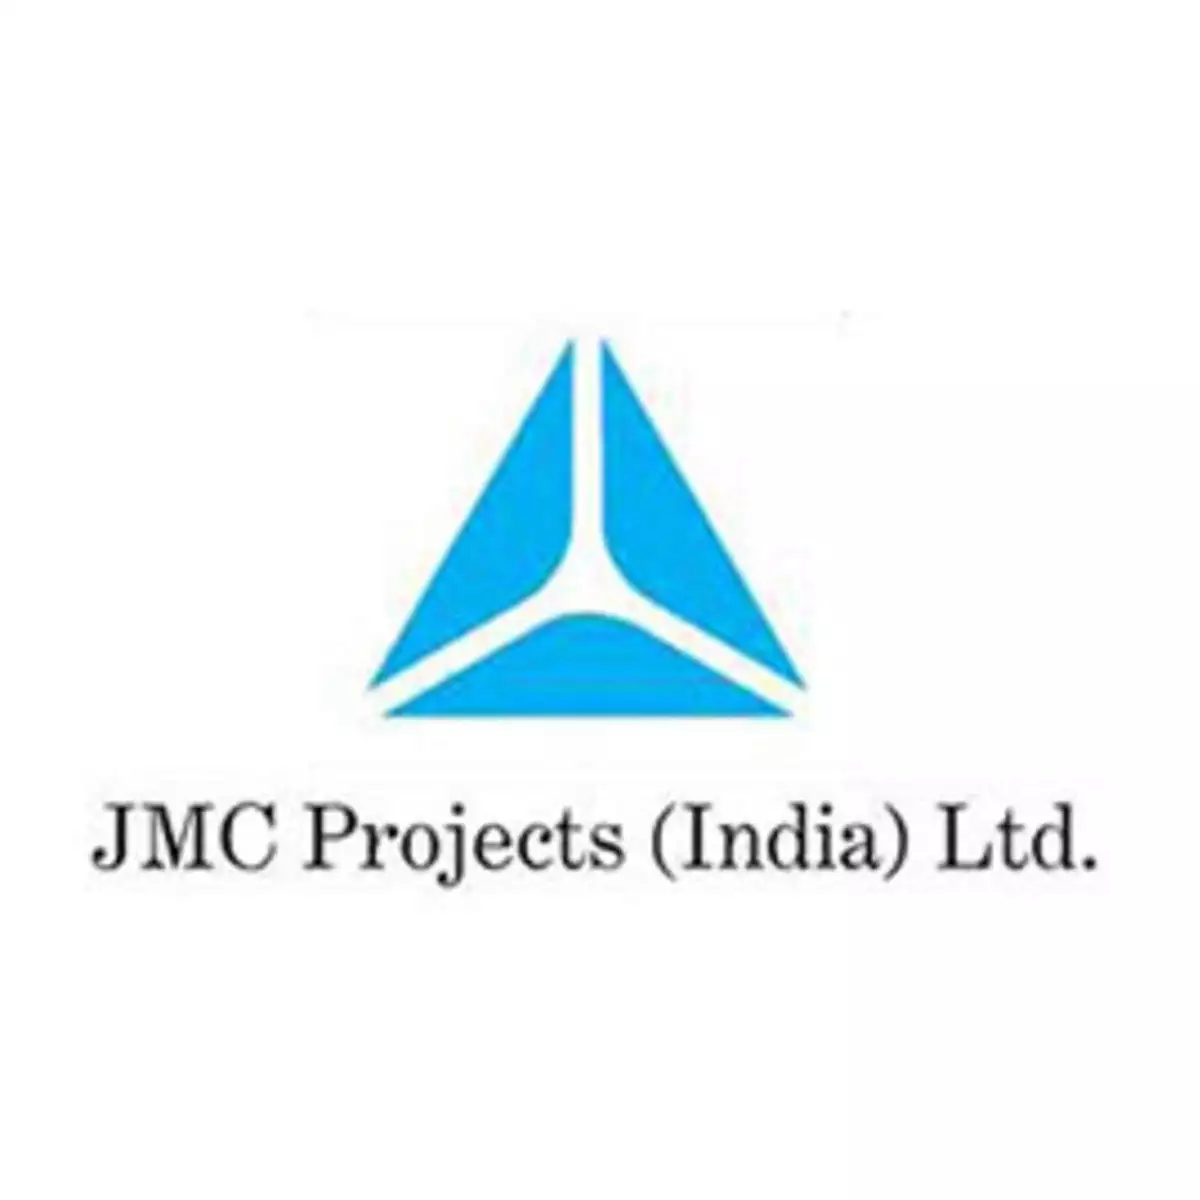 jmc-projects-bags-new-orders-worth-rs-1624-cr